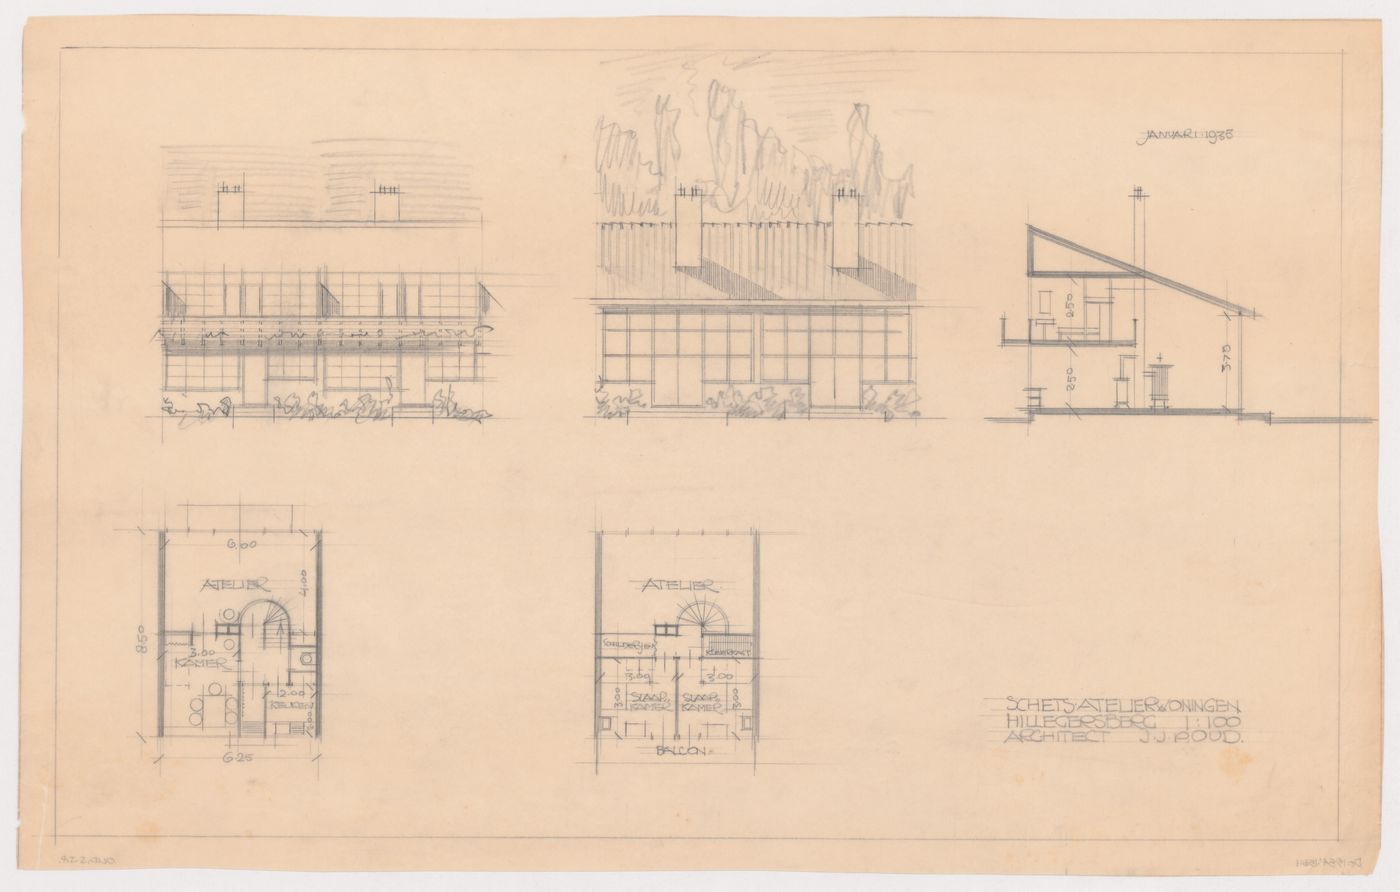 Ground and first floor plans, elevations, and section for a house/studio, Hillegersberg, Netherlands